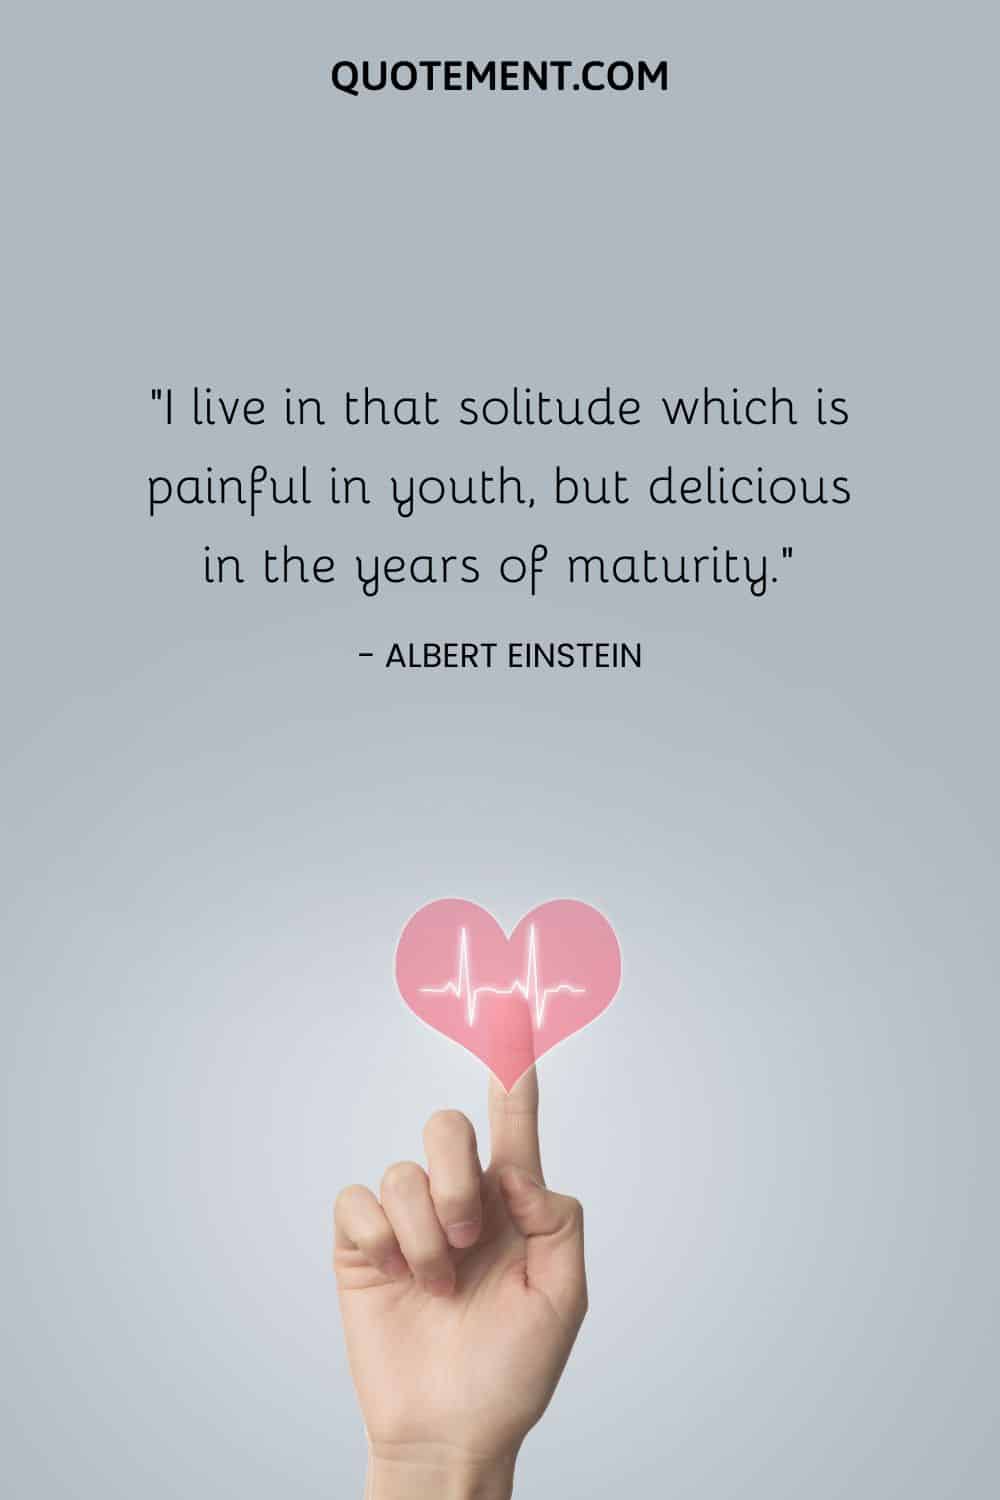 I live in that solitude which is painful in youth, but delicious in the years of maturity